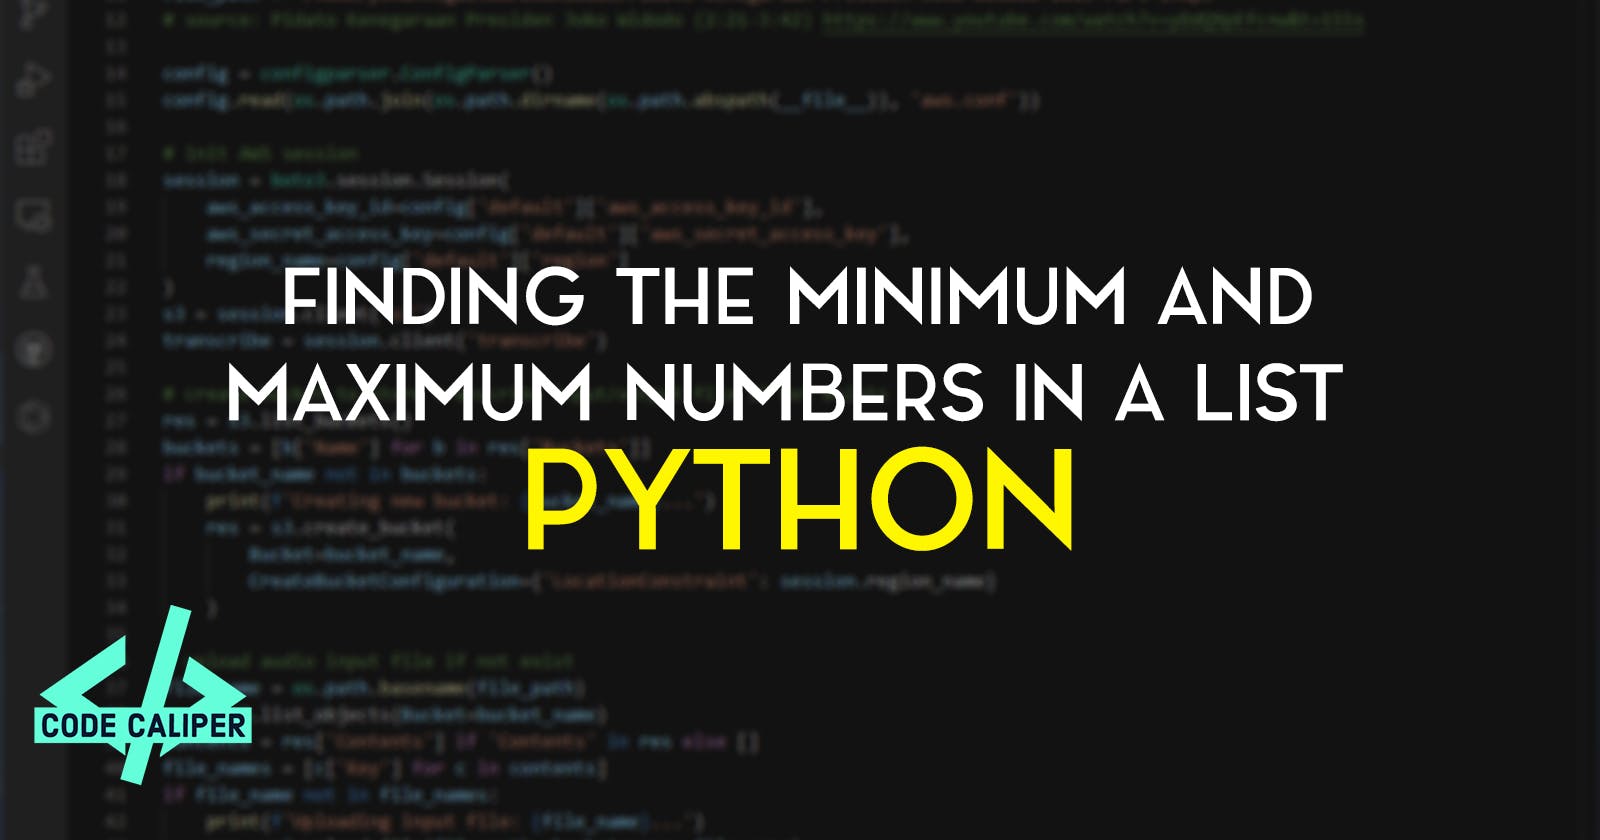 Finding the Minimum and Maximum Numbers in a List with Python